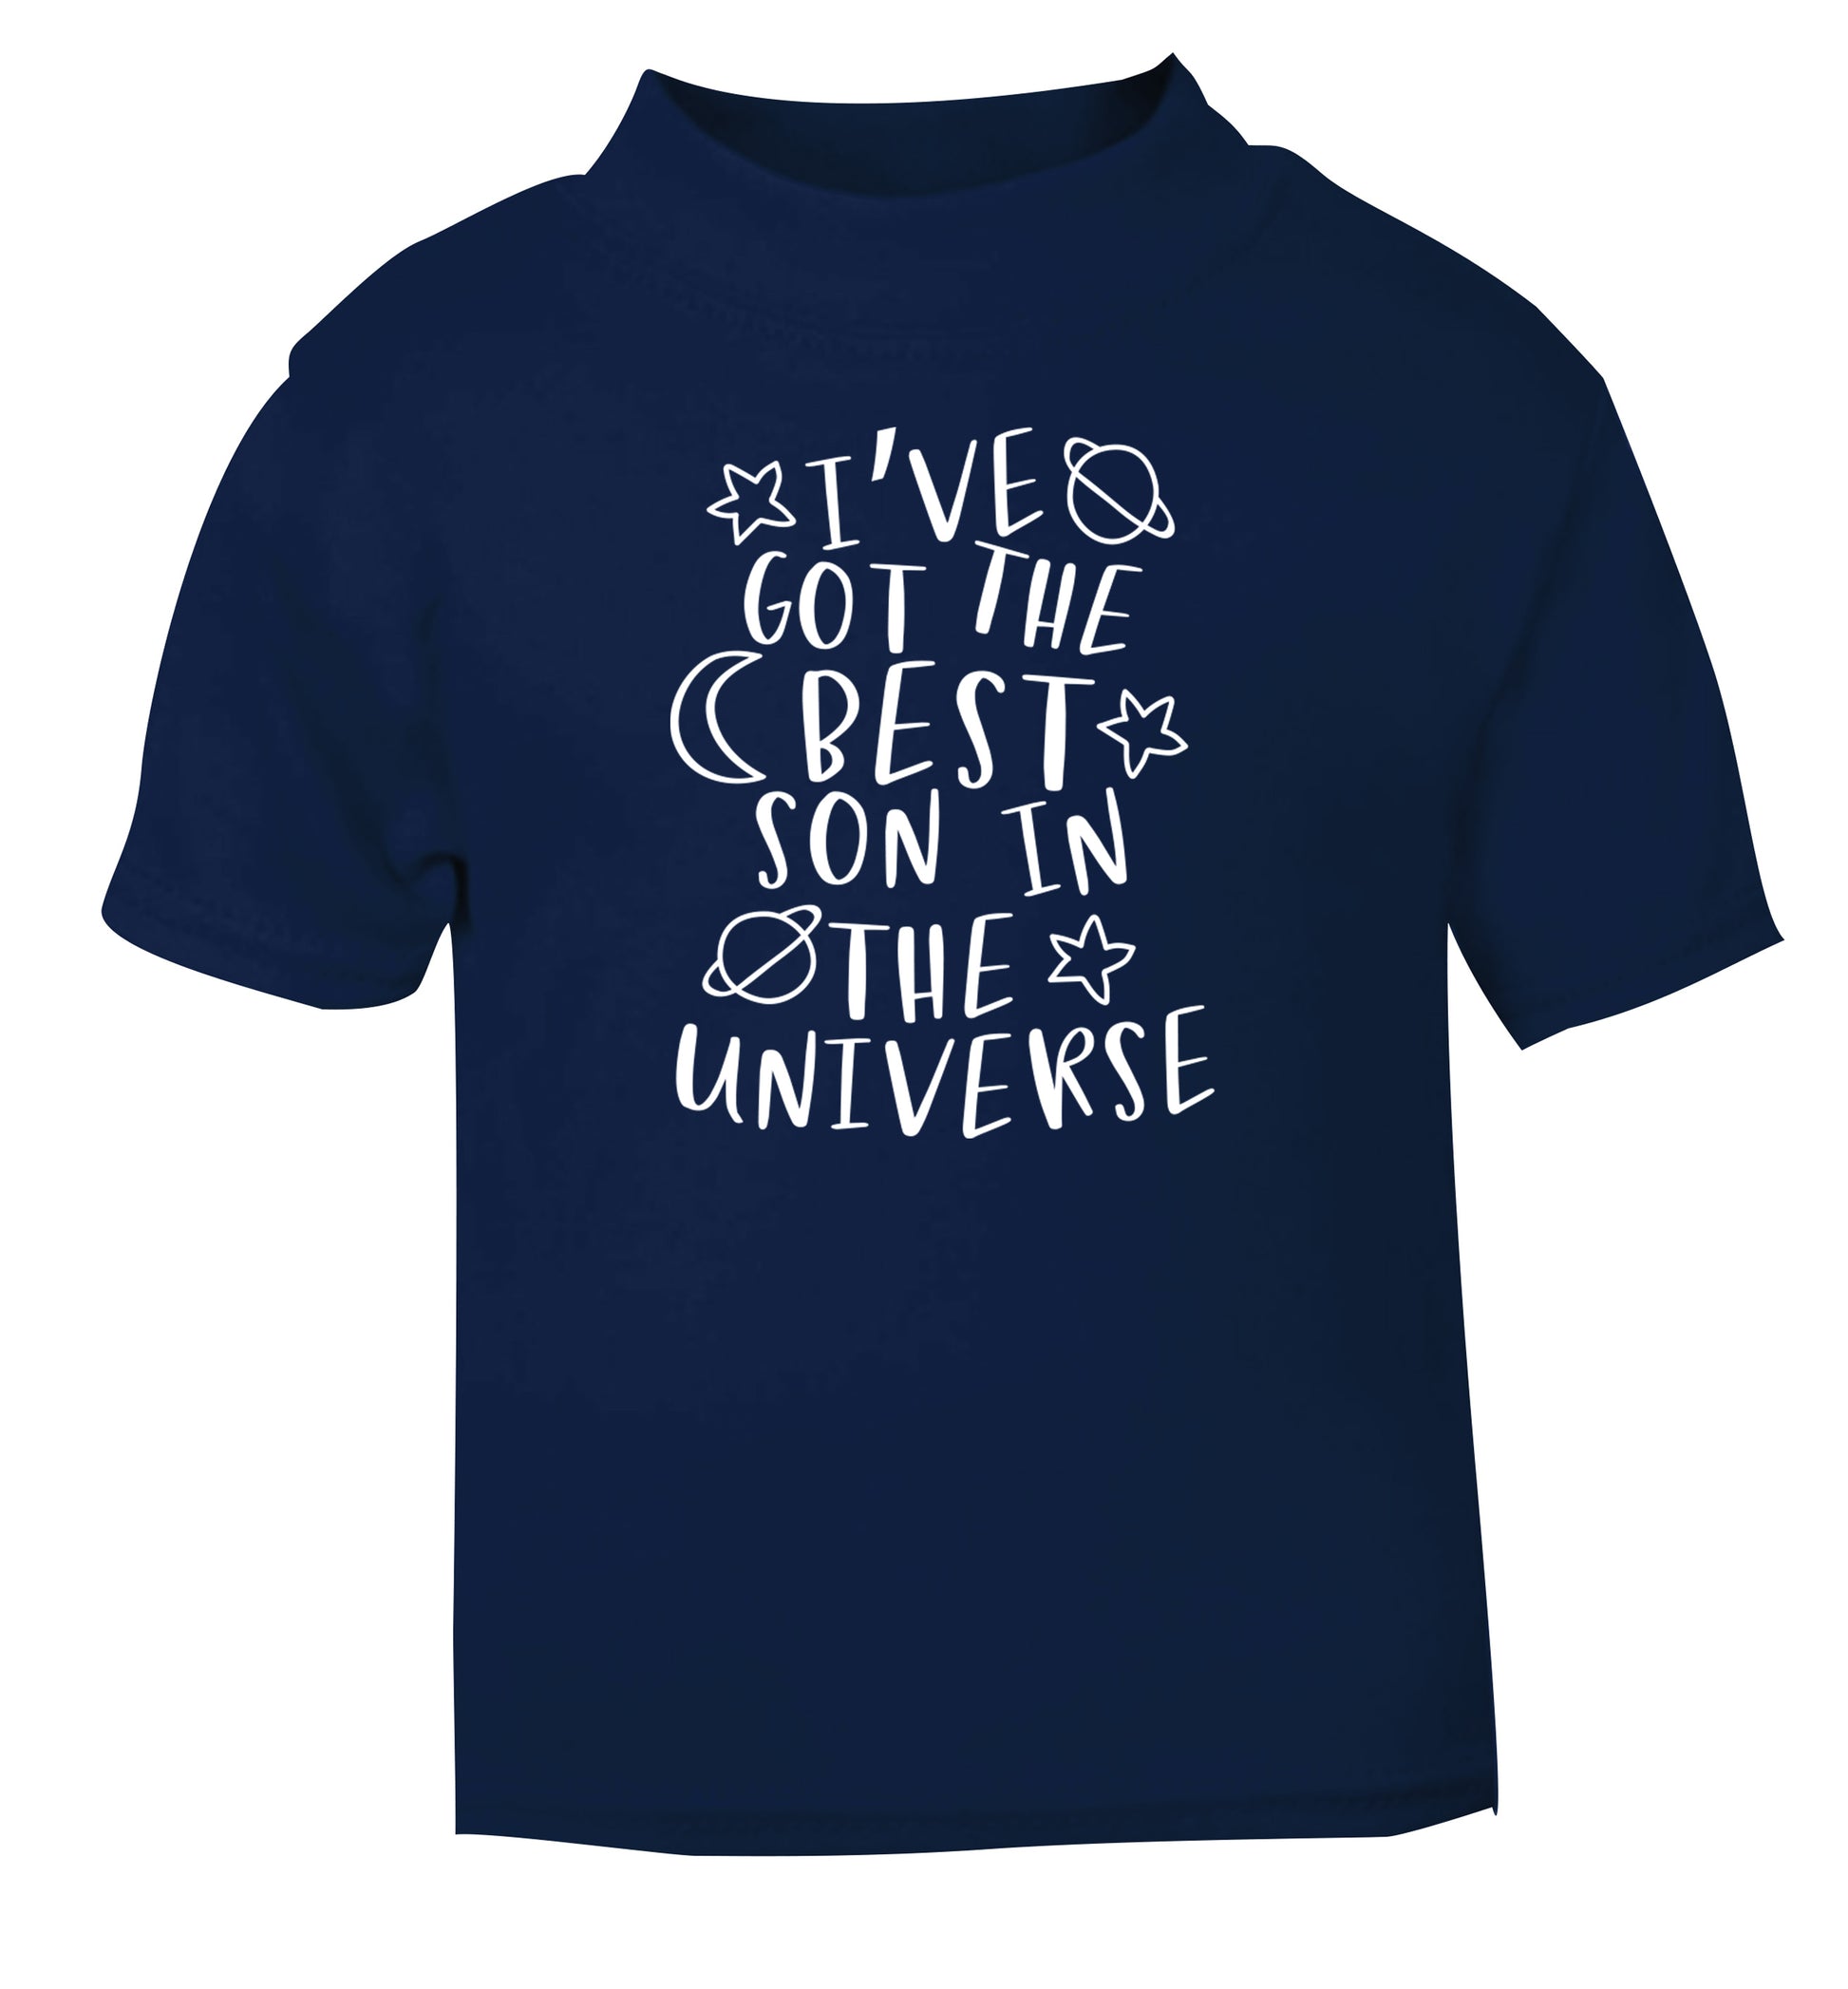 I've got the best son in the universe navy Baby Toddler Tshirt 2 Years